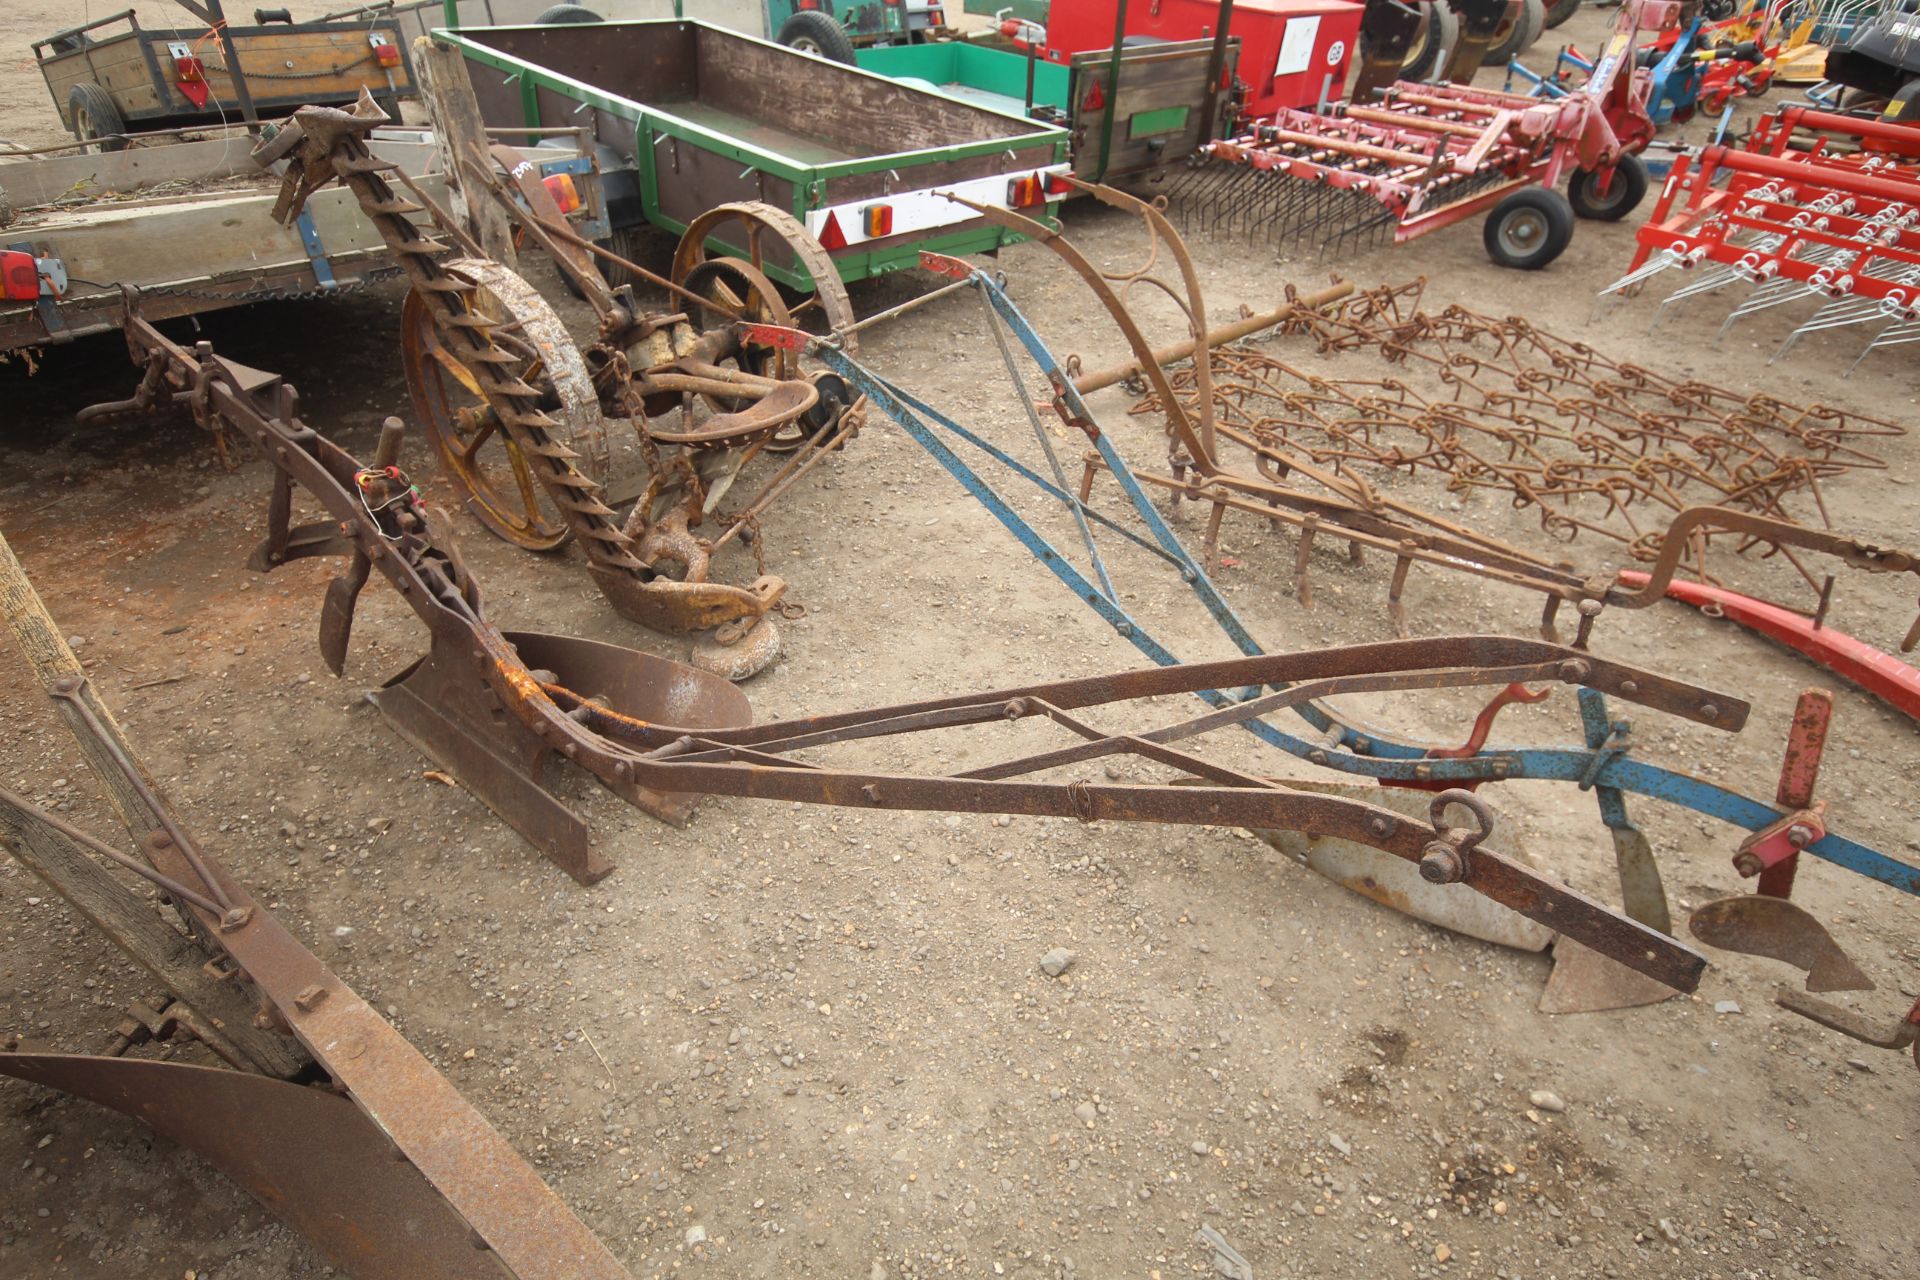 Ransomes YL horse drawn plough.